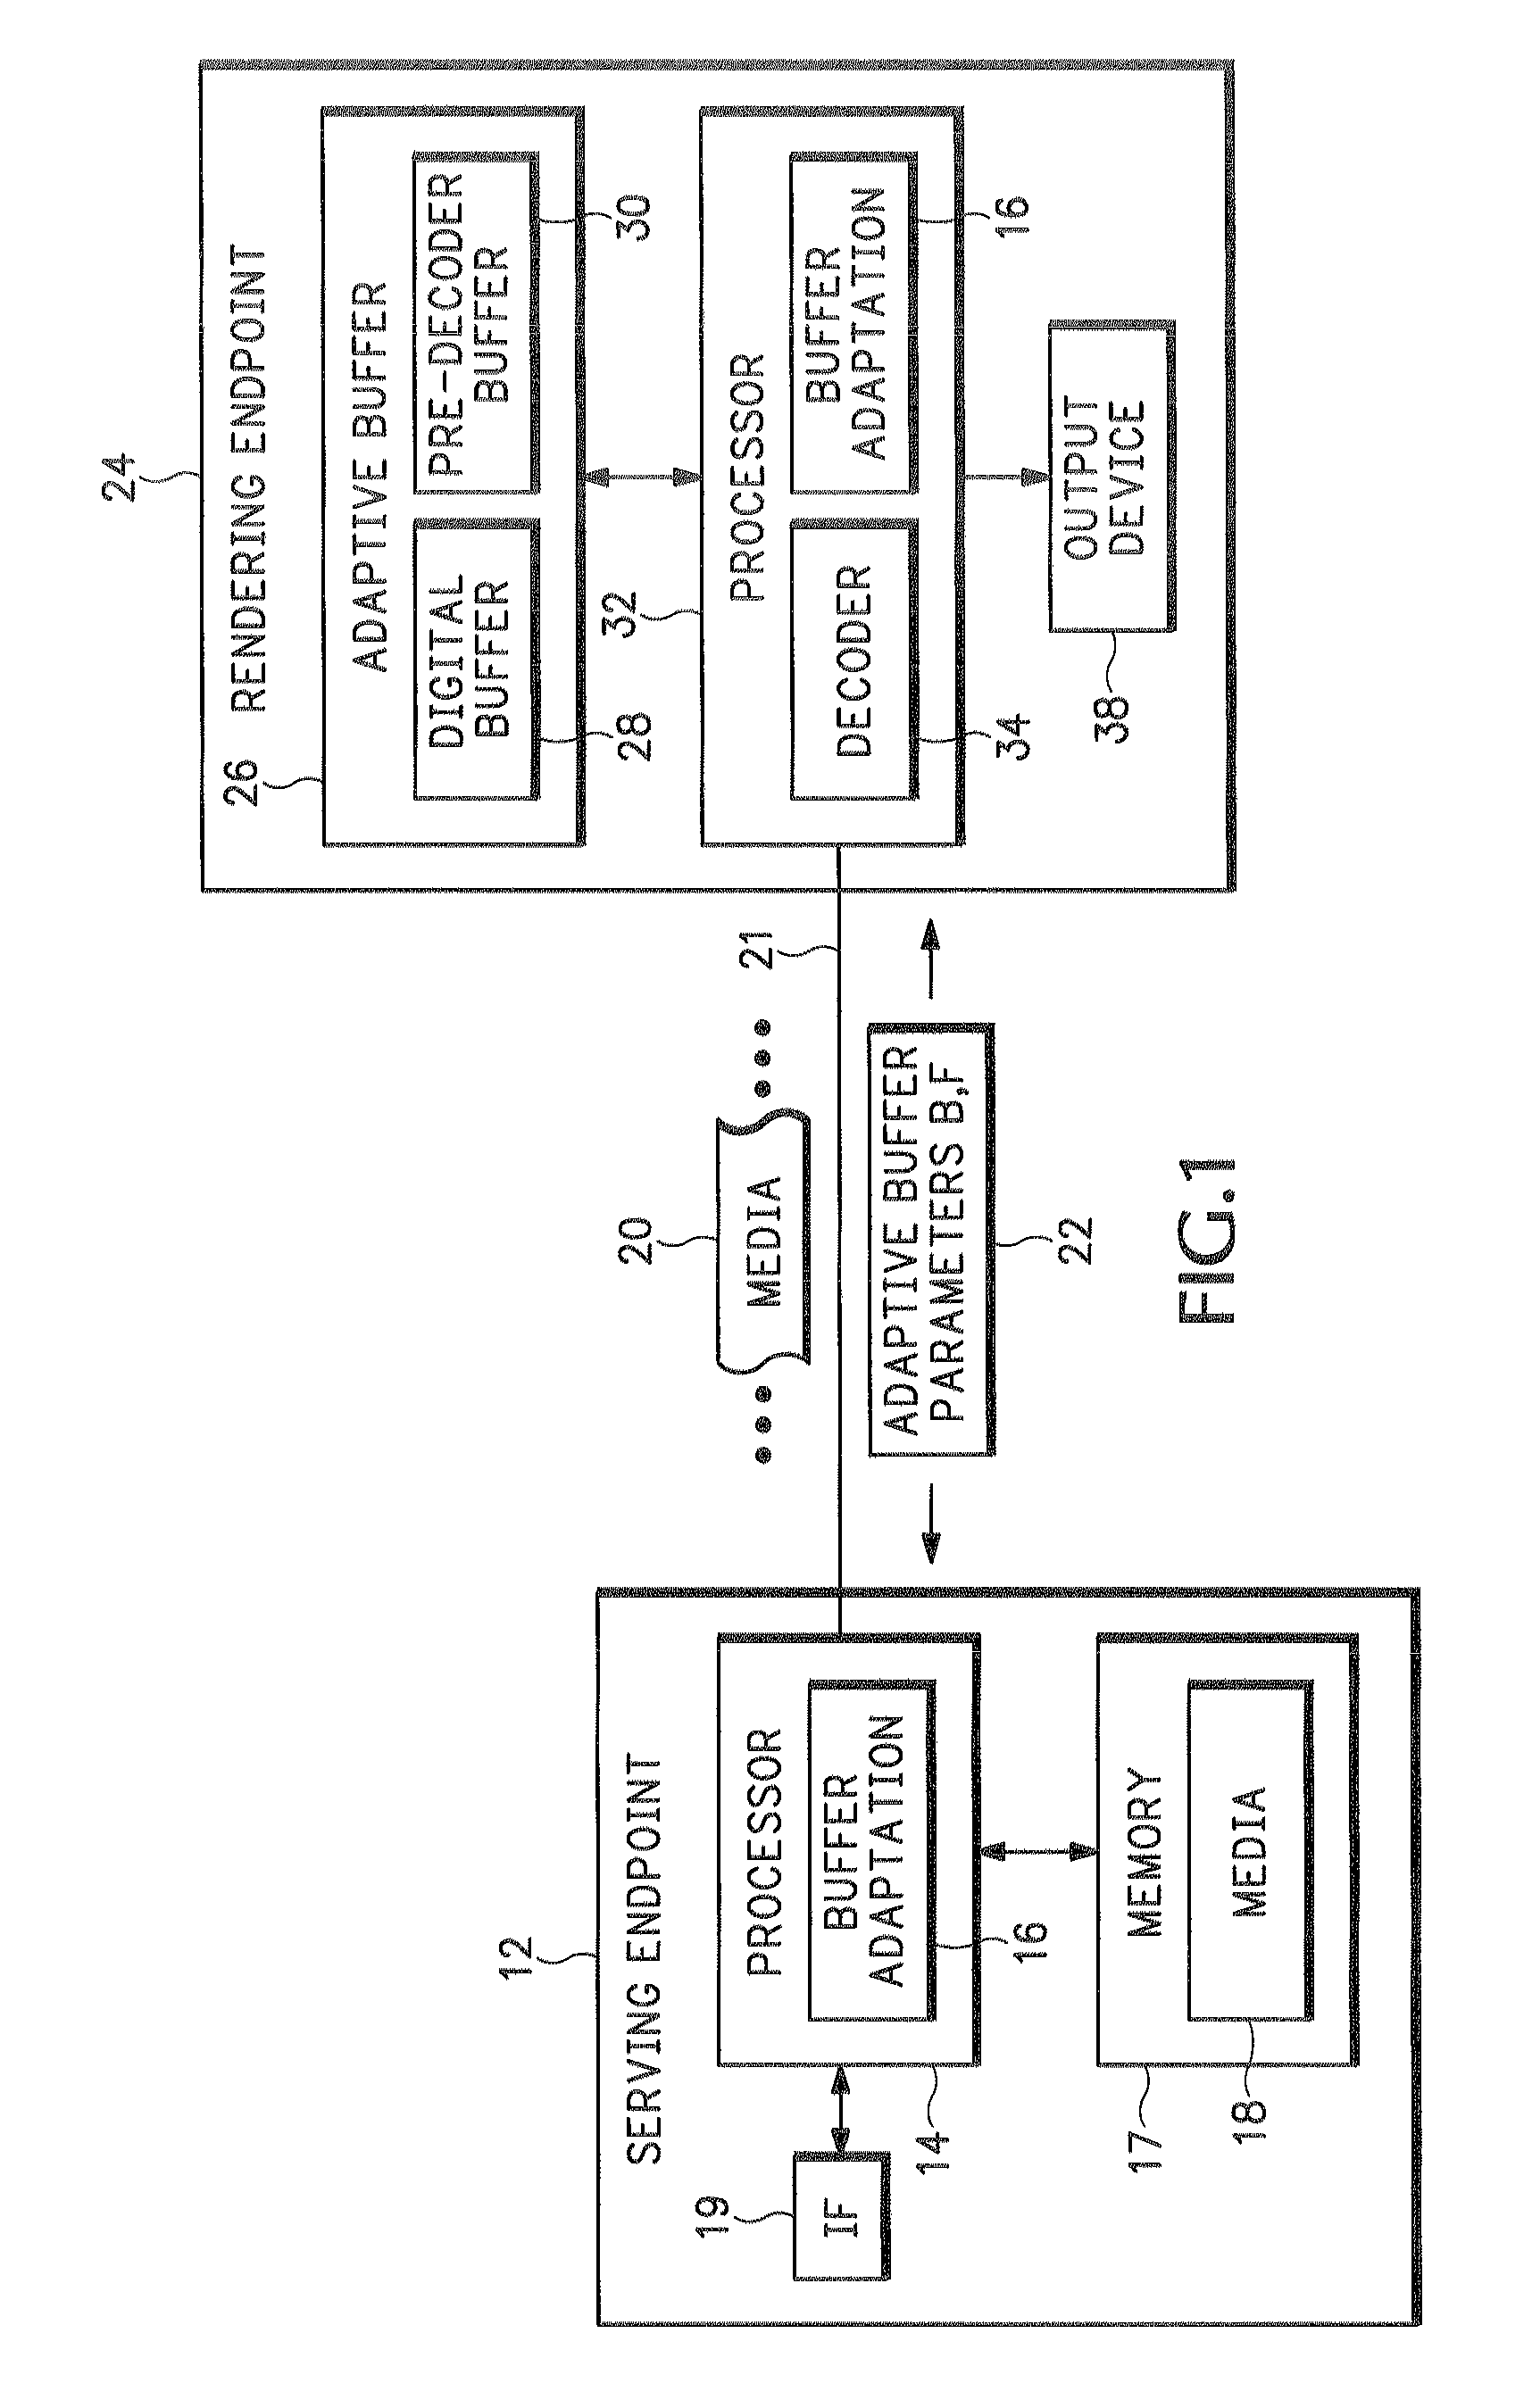 Method and apparatus for adaptive buffering